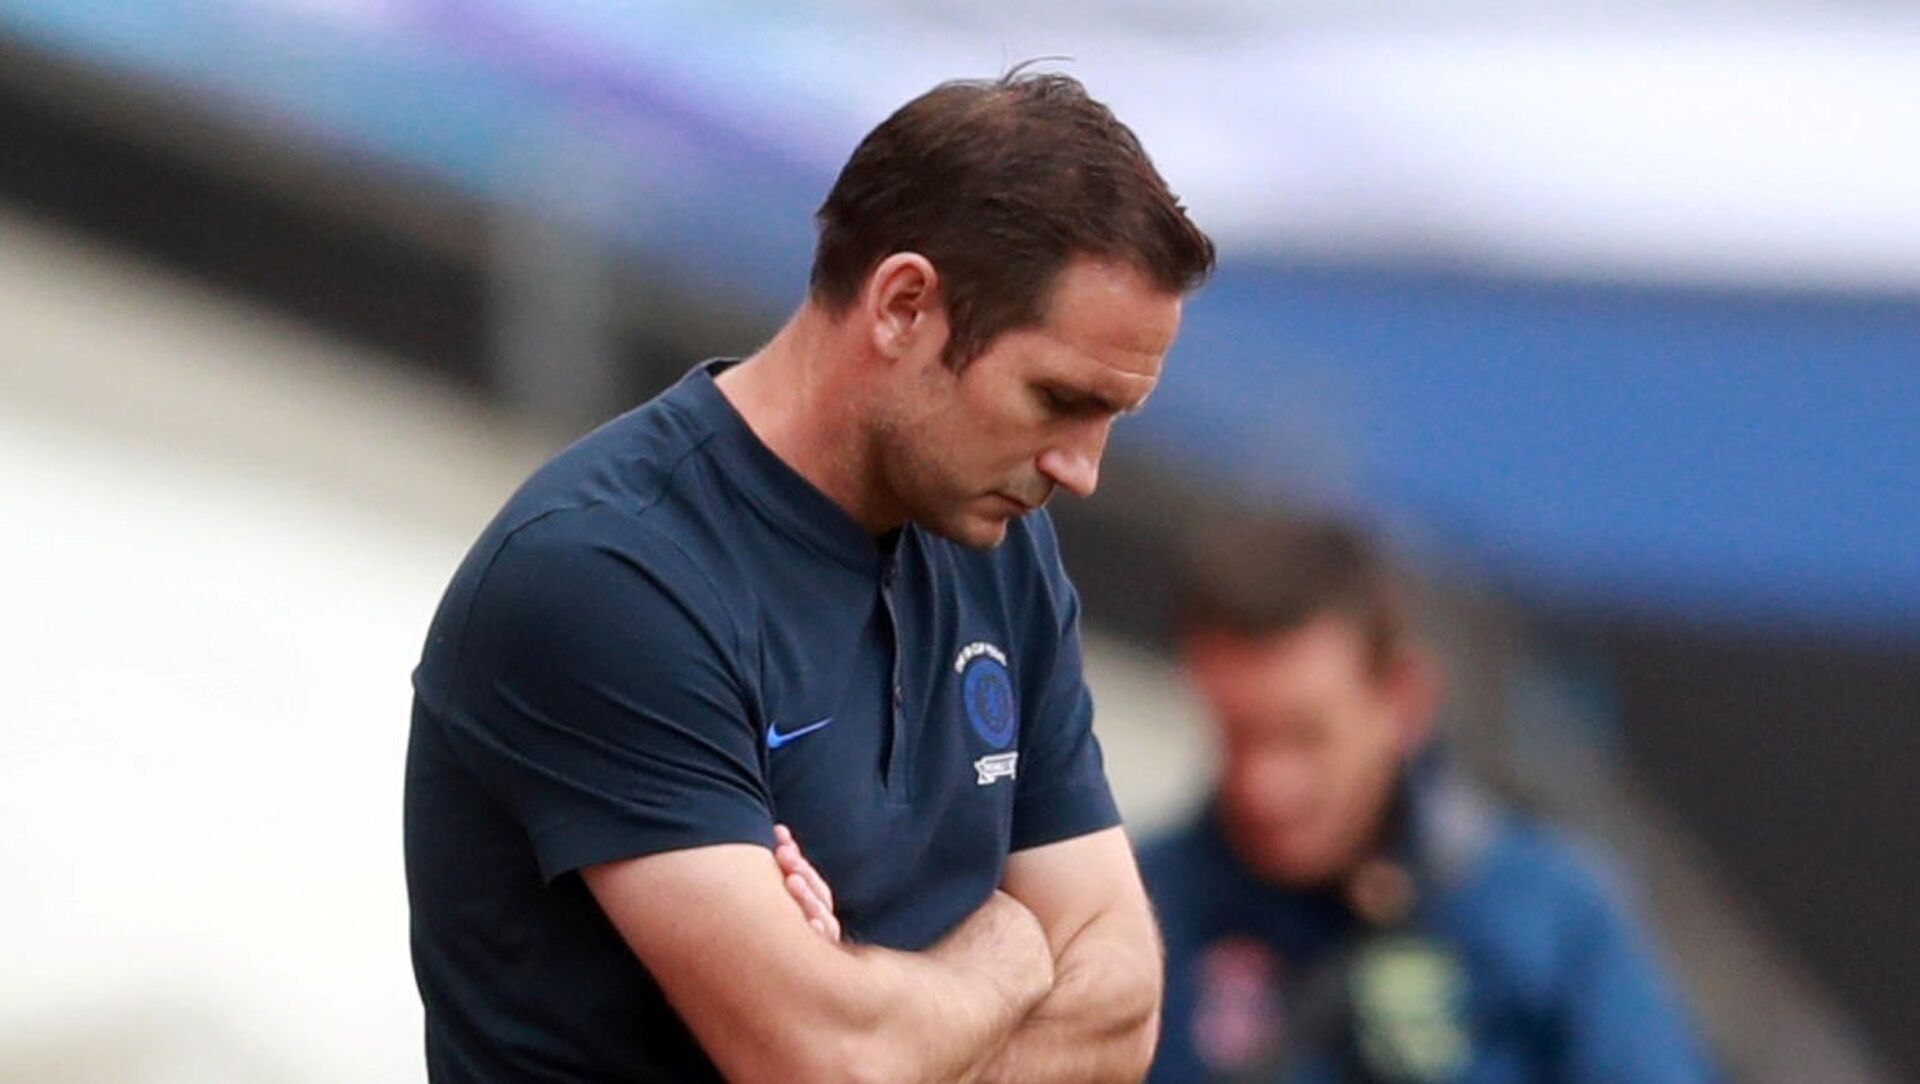 Frank Lampard, who has been sacked as Chelsea manager - اسپوتنیک افغانستان  , 1920, 08.11.2021